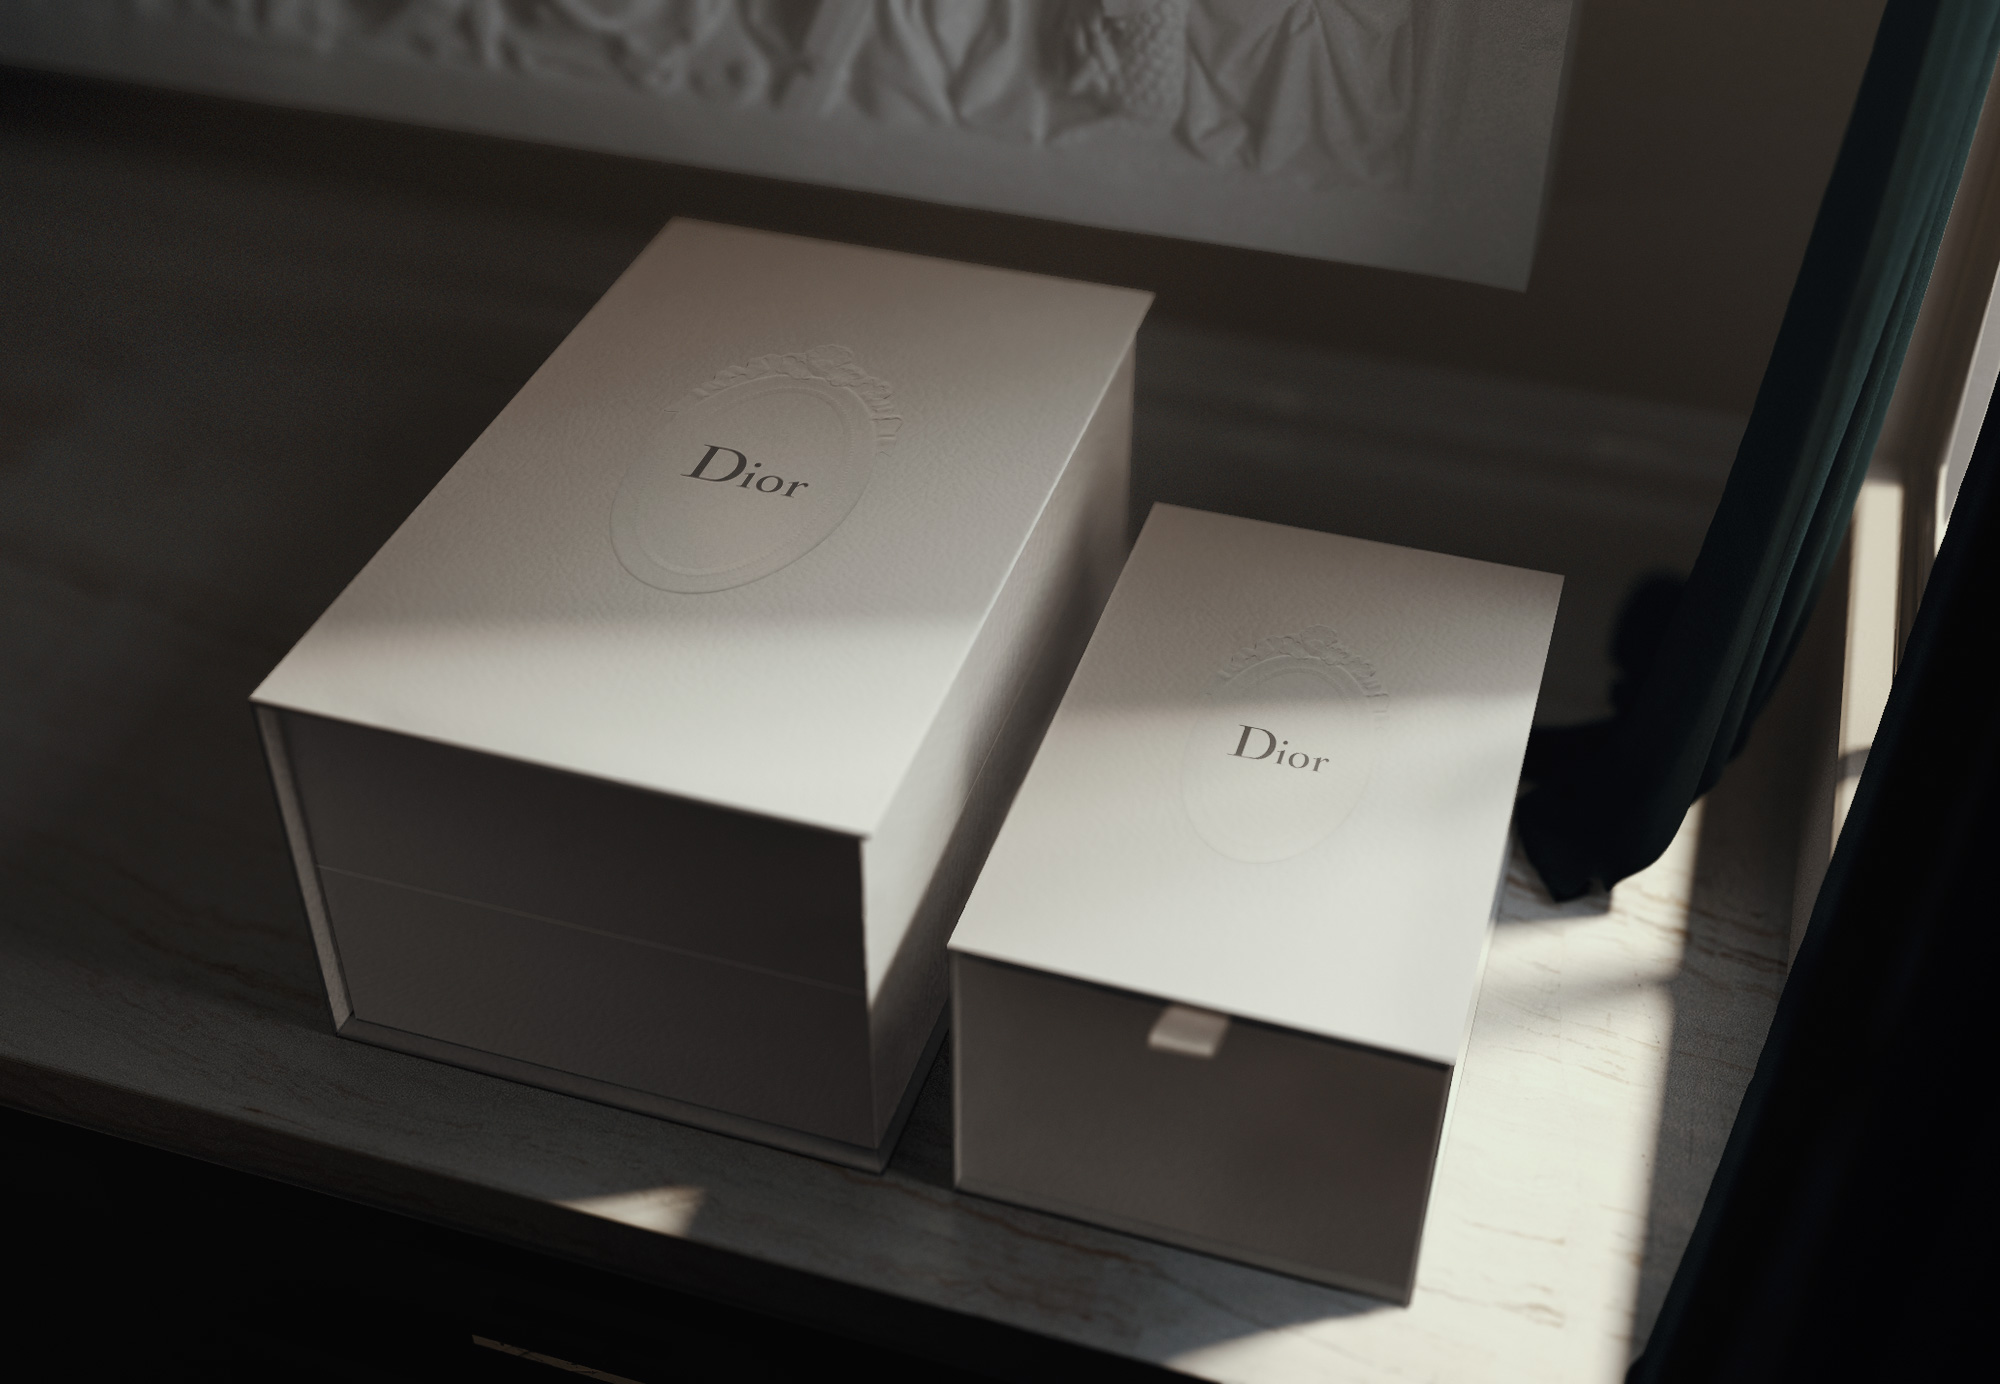 Packaging Design for Dior